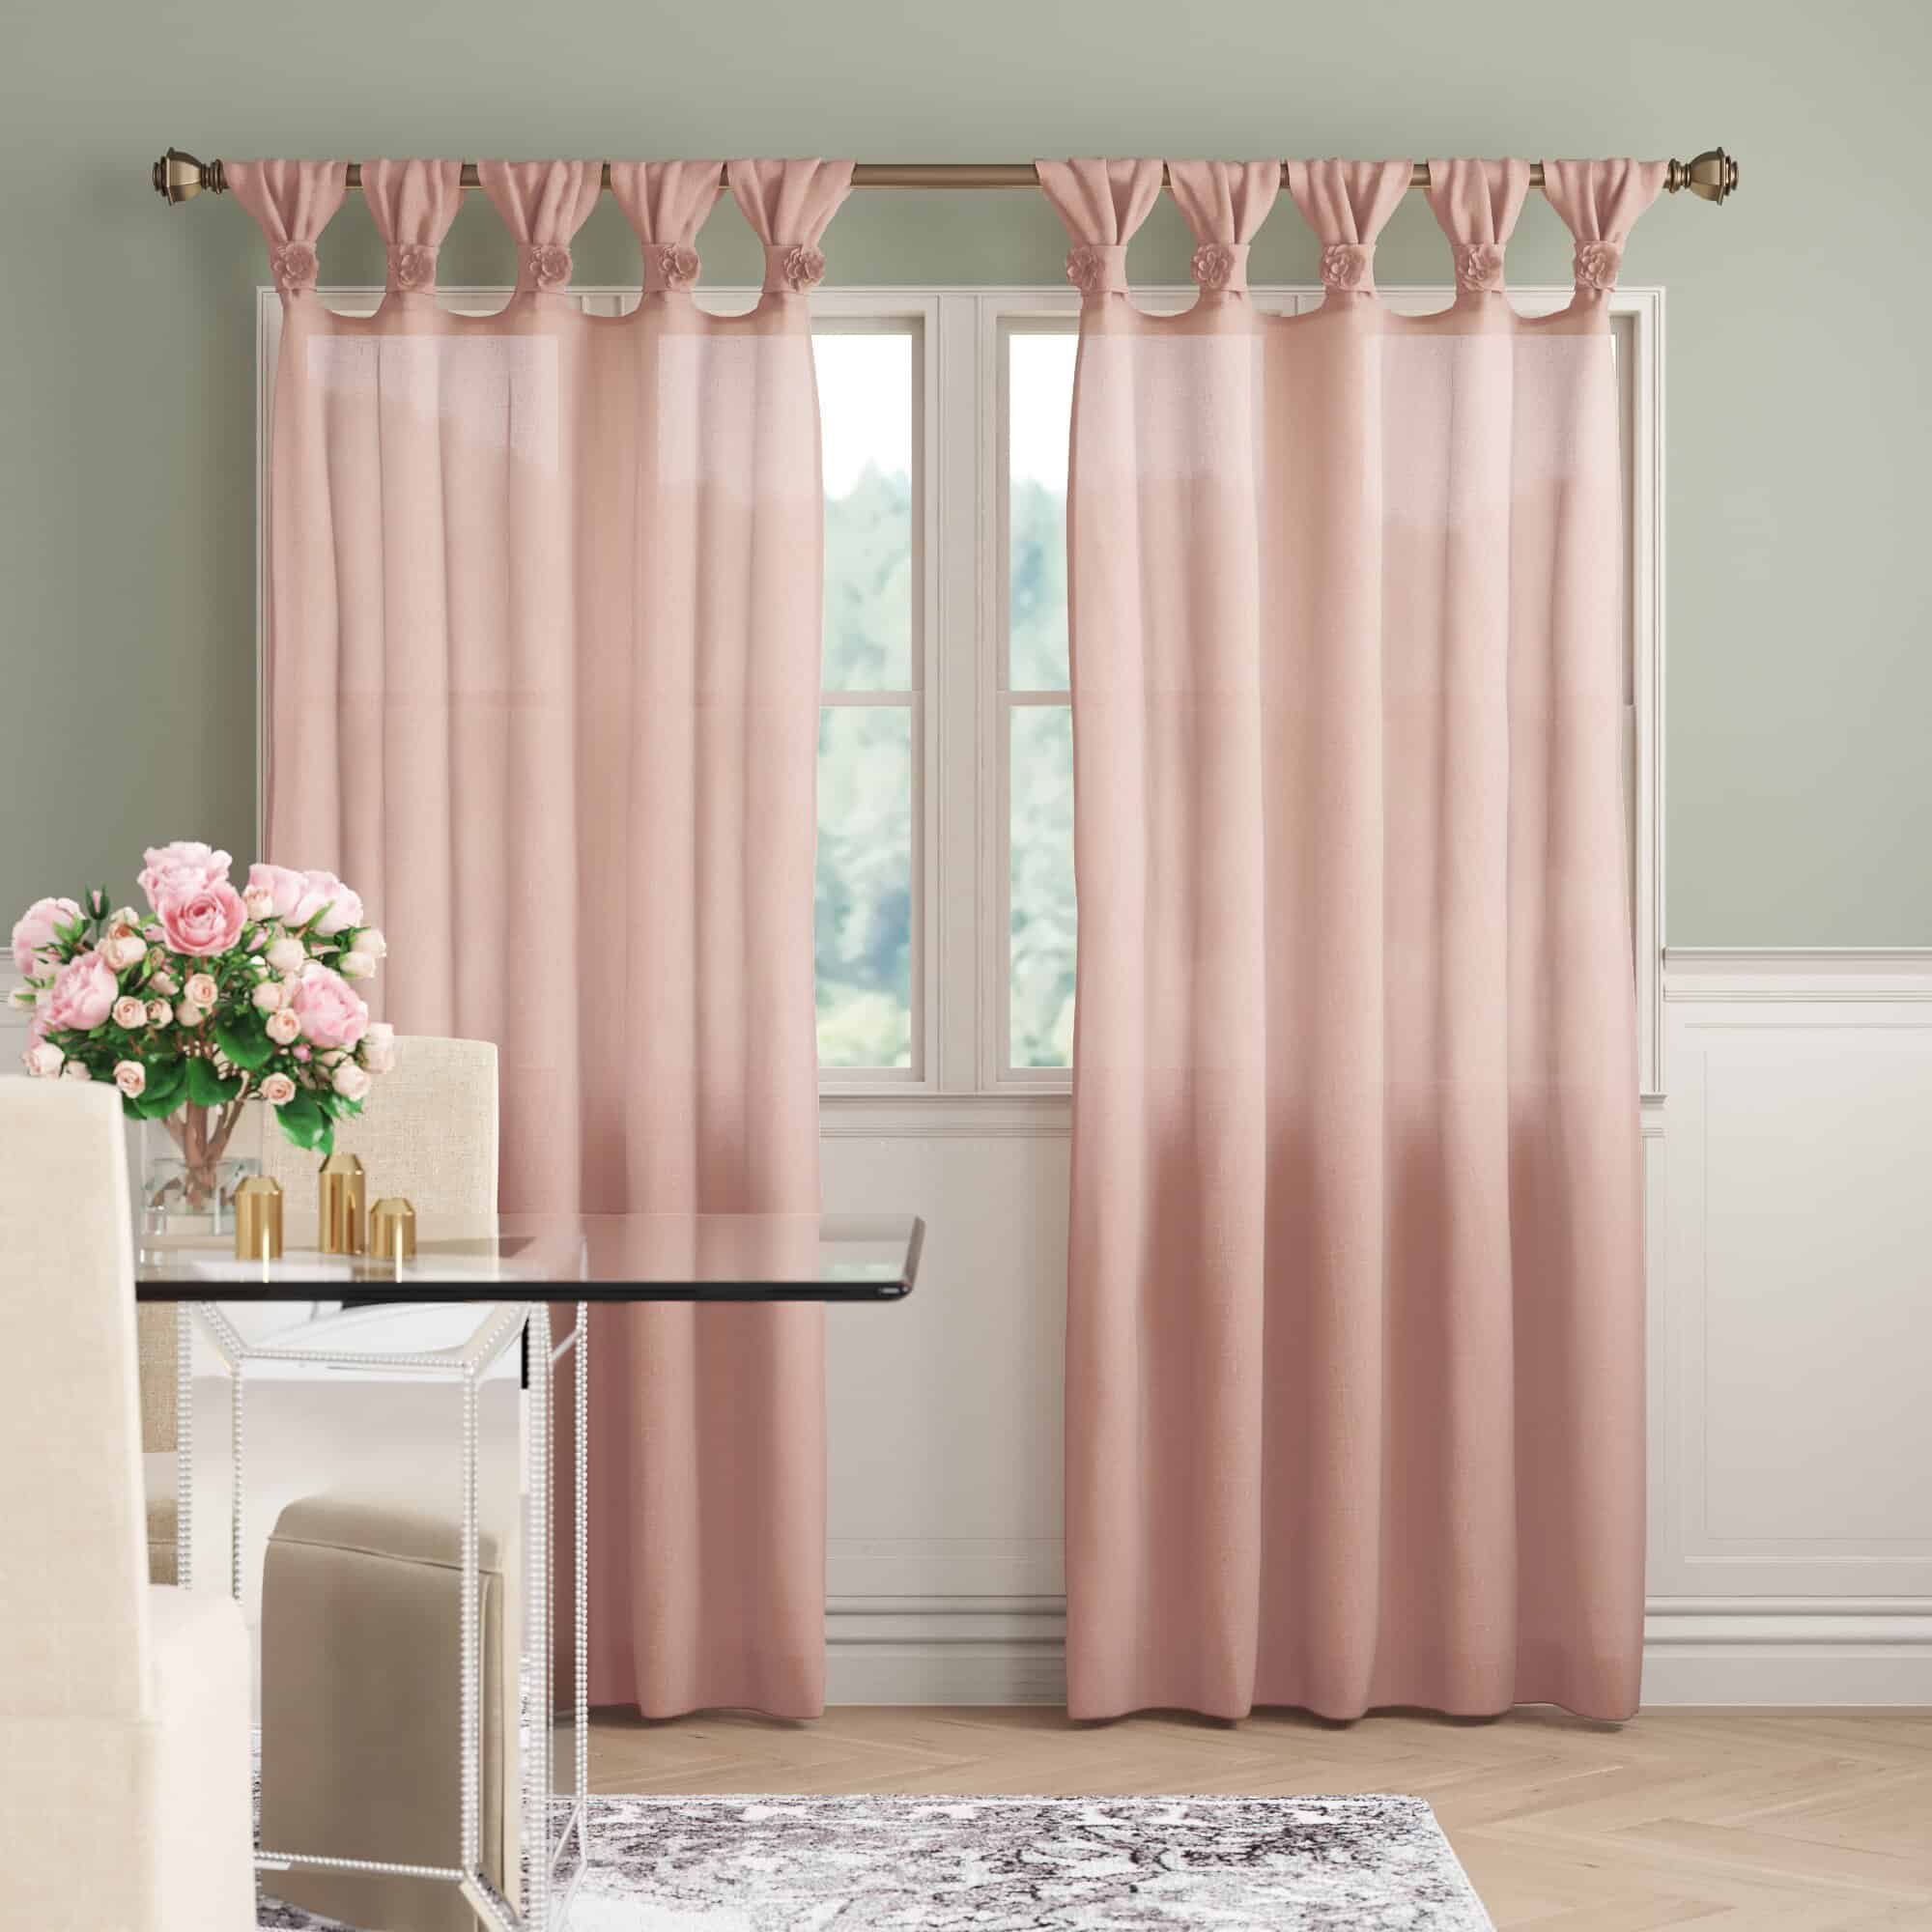  Rose Colored Curtains Look Dreamy And Soft